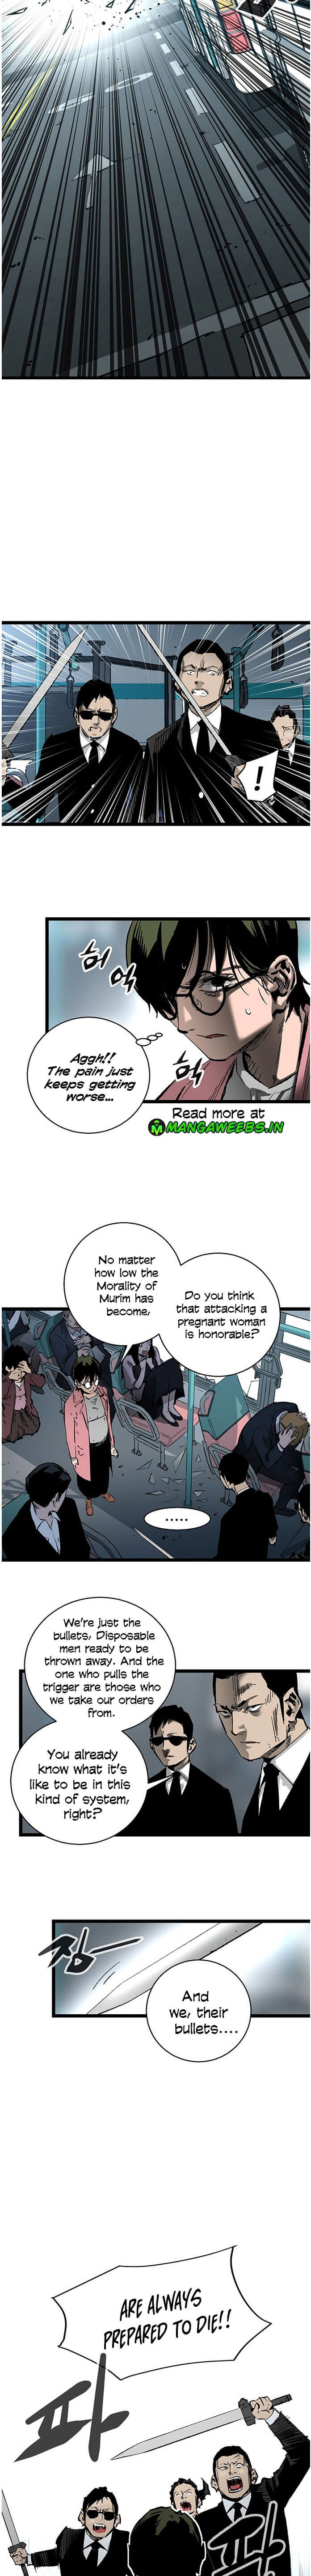 Gosam Mussang Chapter 30 page 8